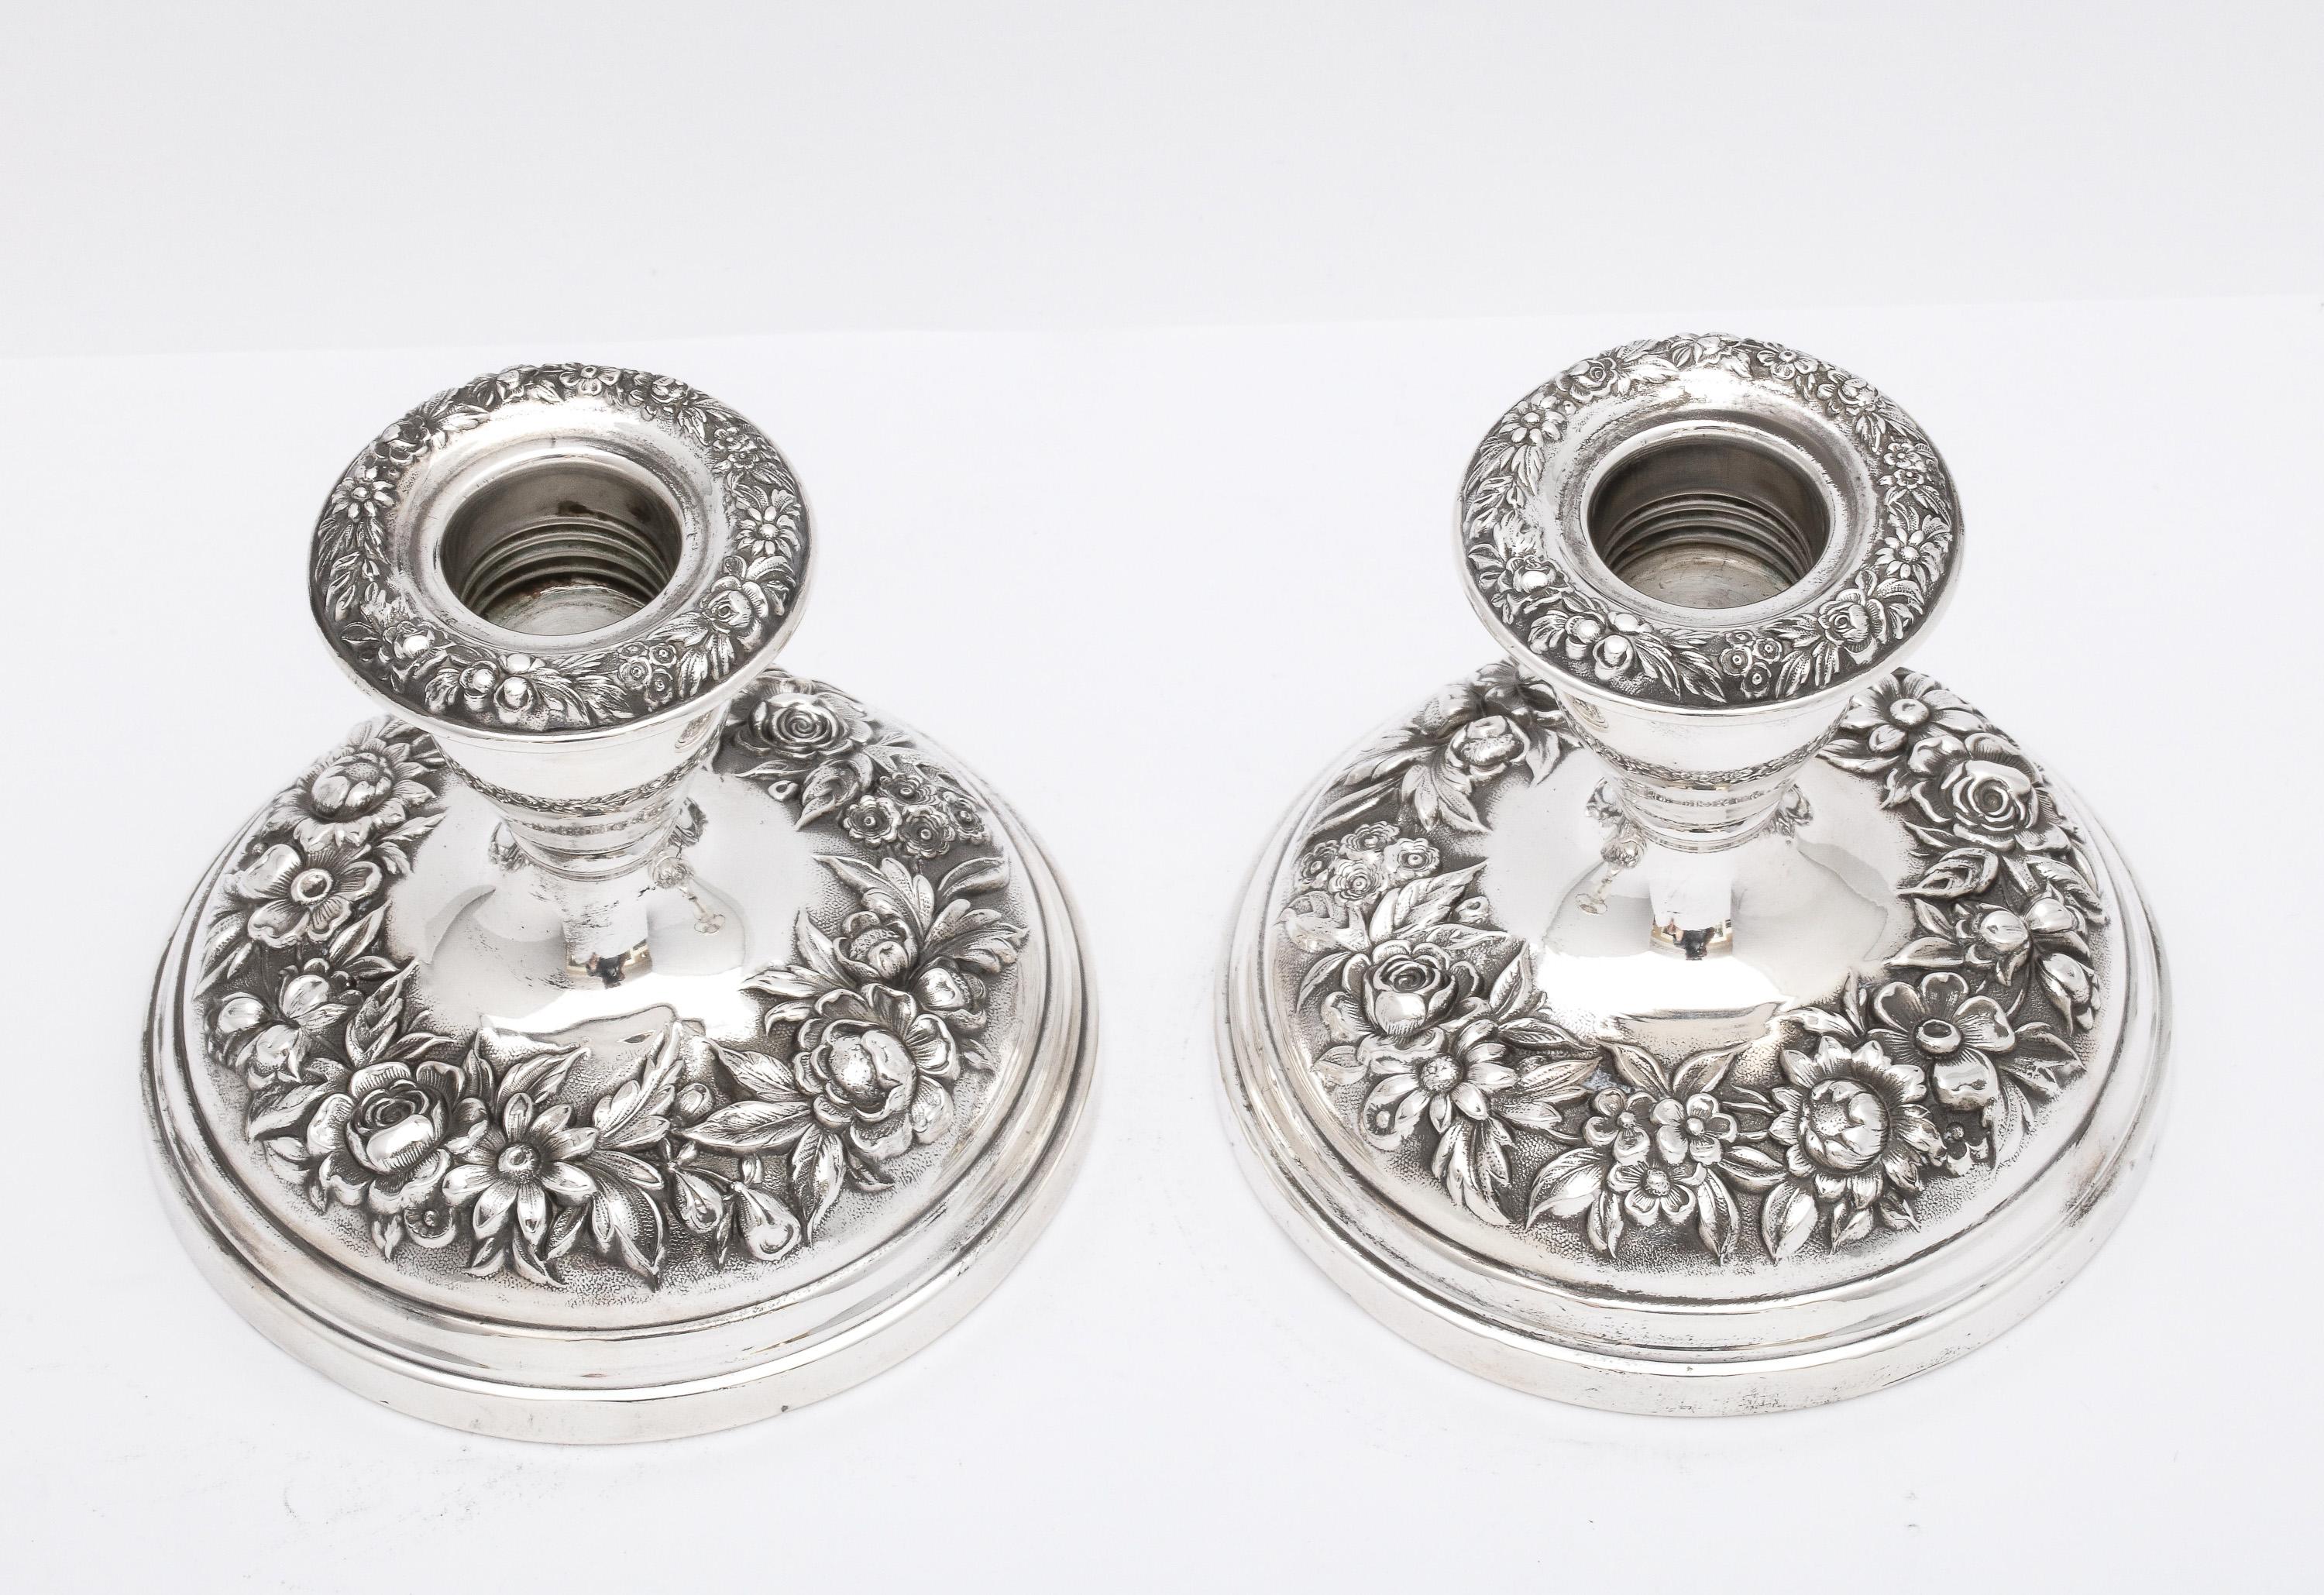 Pair of Sterling Silver Repousse Pattern Candlesticks by S. Kirk and Sons In Good Condition For Sale In New York, NY